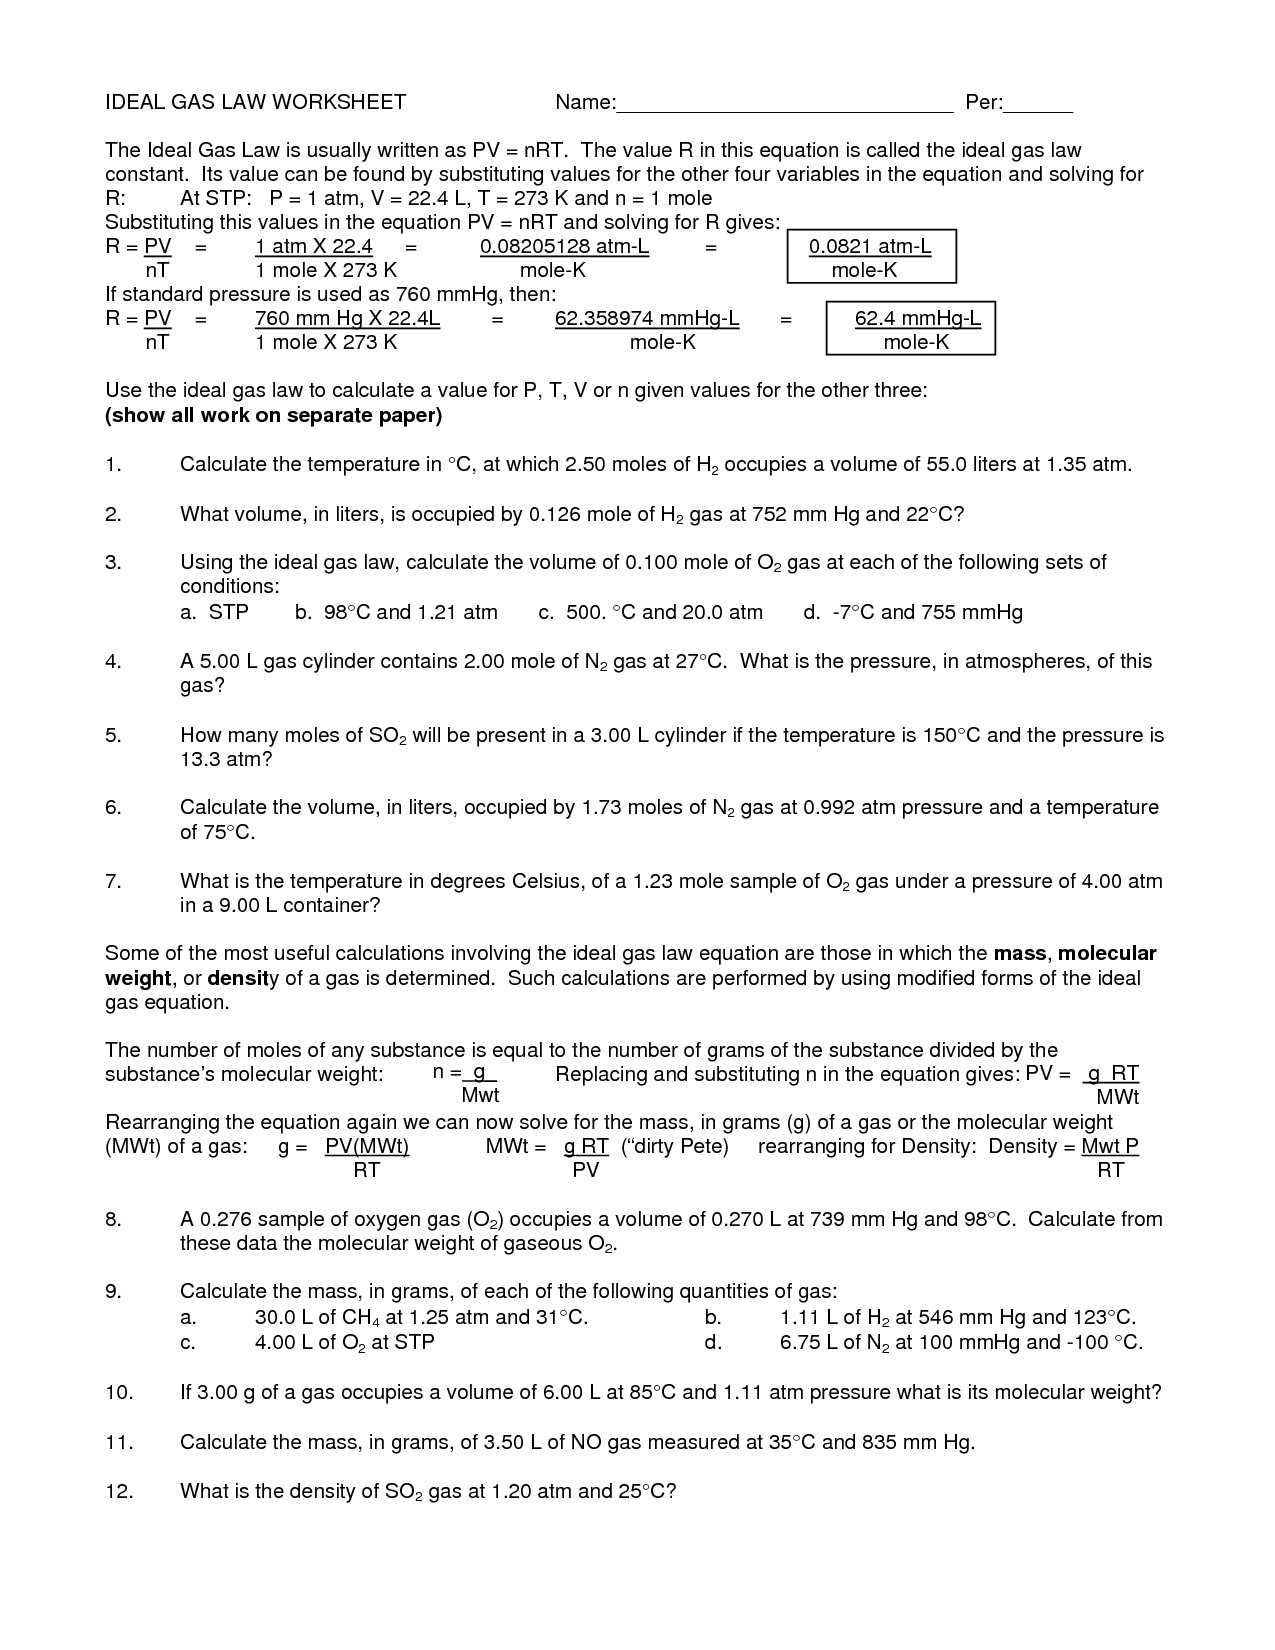 Worksheet Motion Problems Part 2 Answer Key as Well as 15 Best Gas Laws Worksheet 1 Answer Key